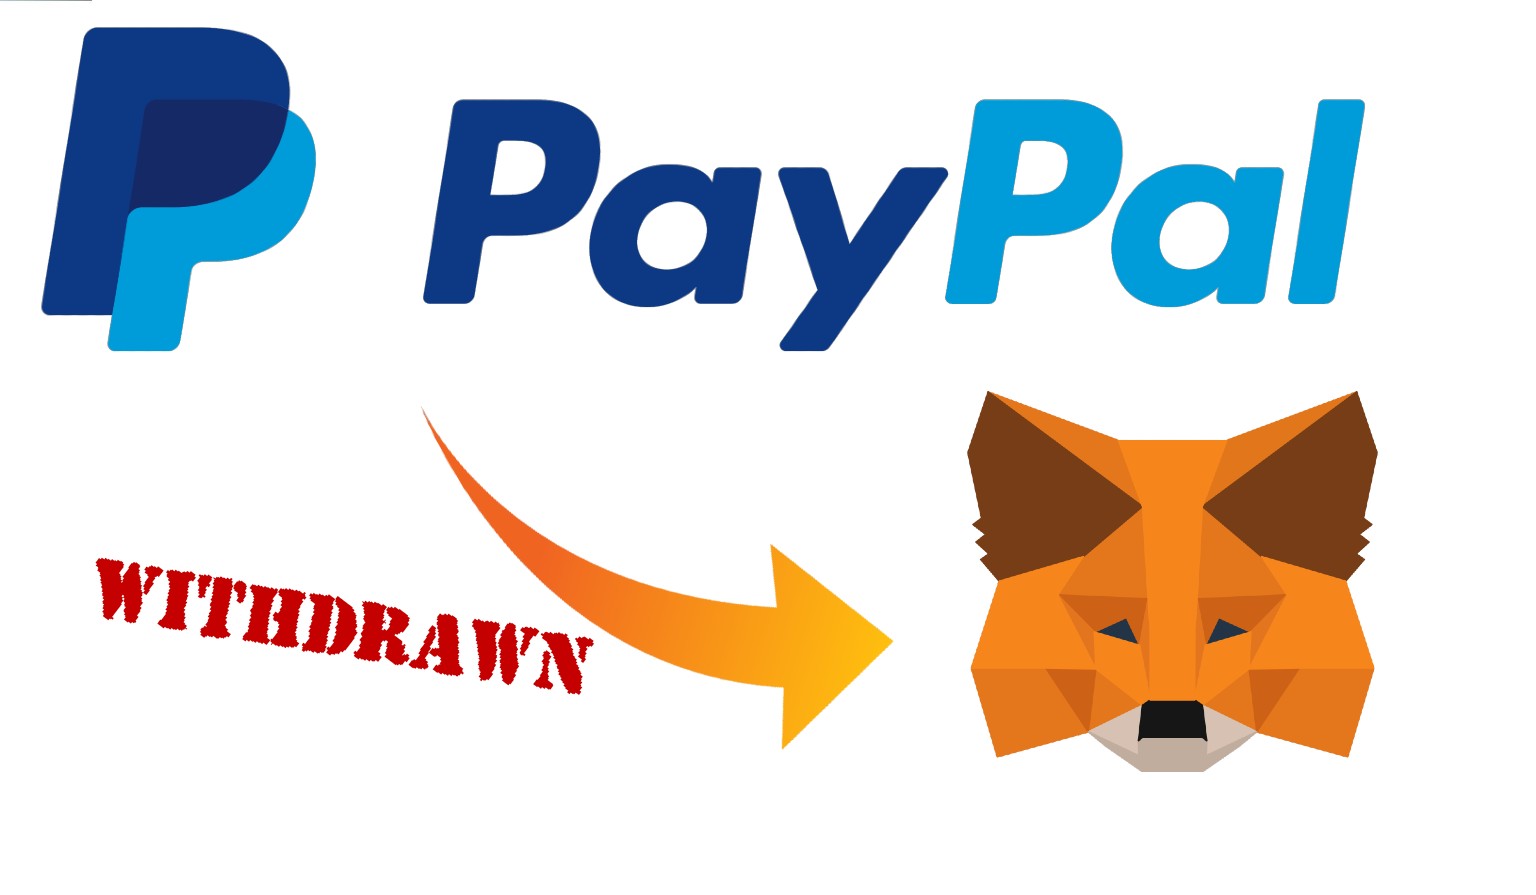 Paypal Withdraw.jpg